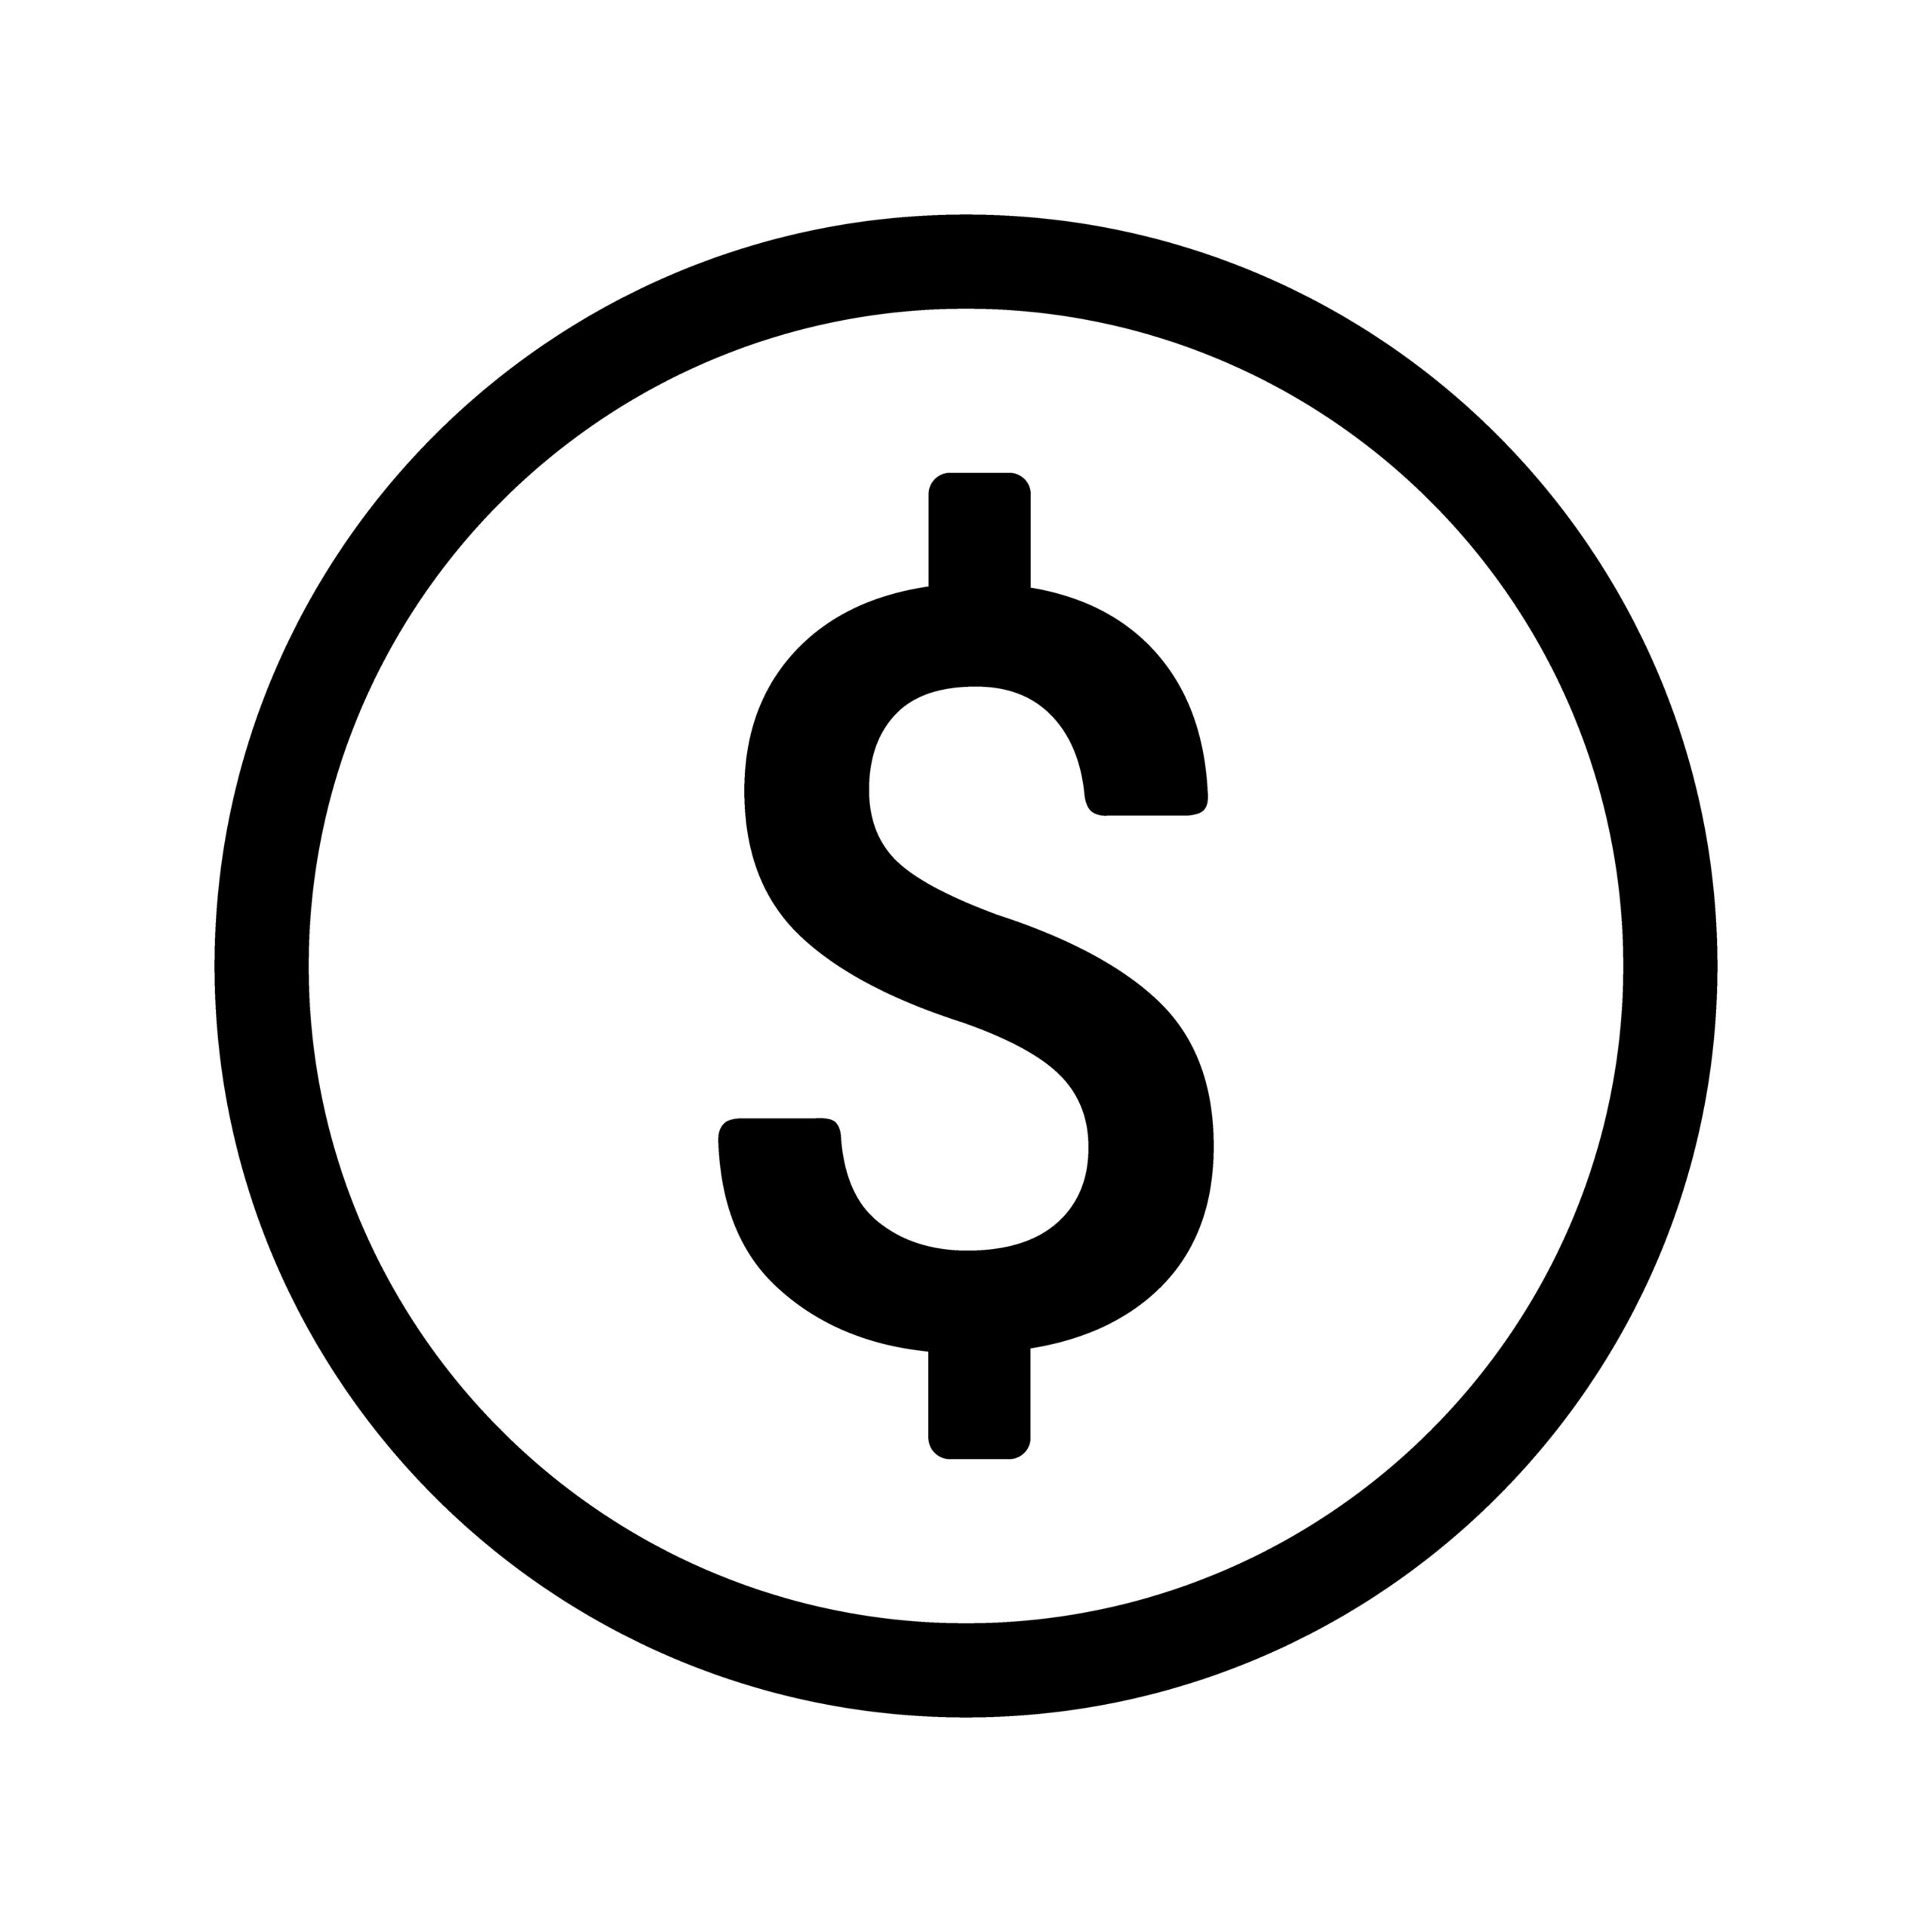 American dollar symbol inside of a black circle on a white background